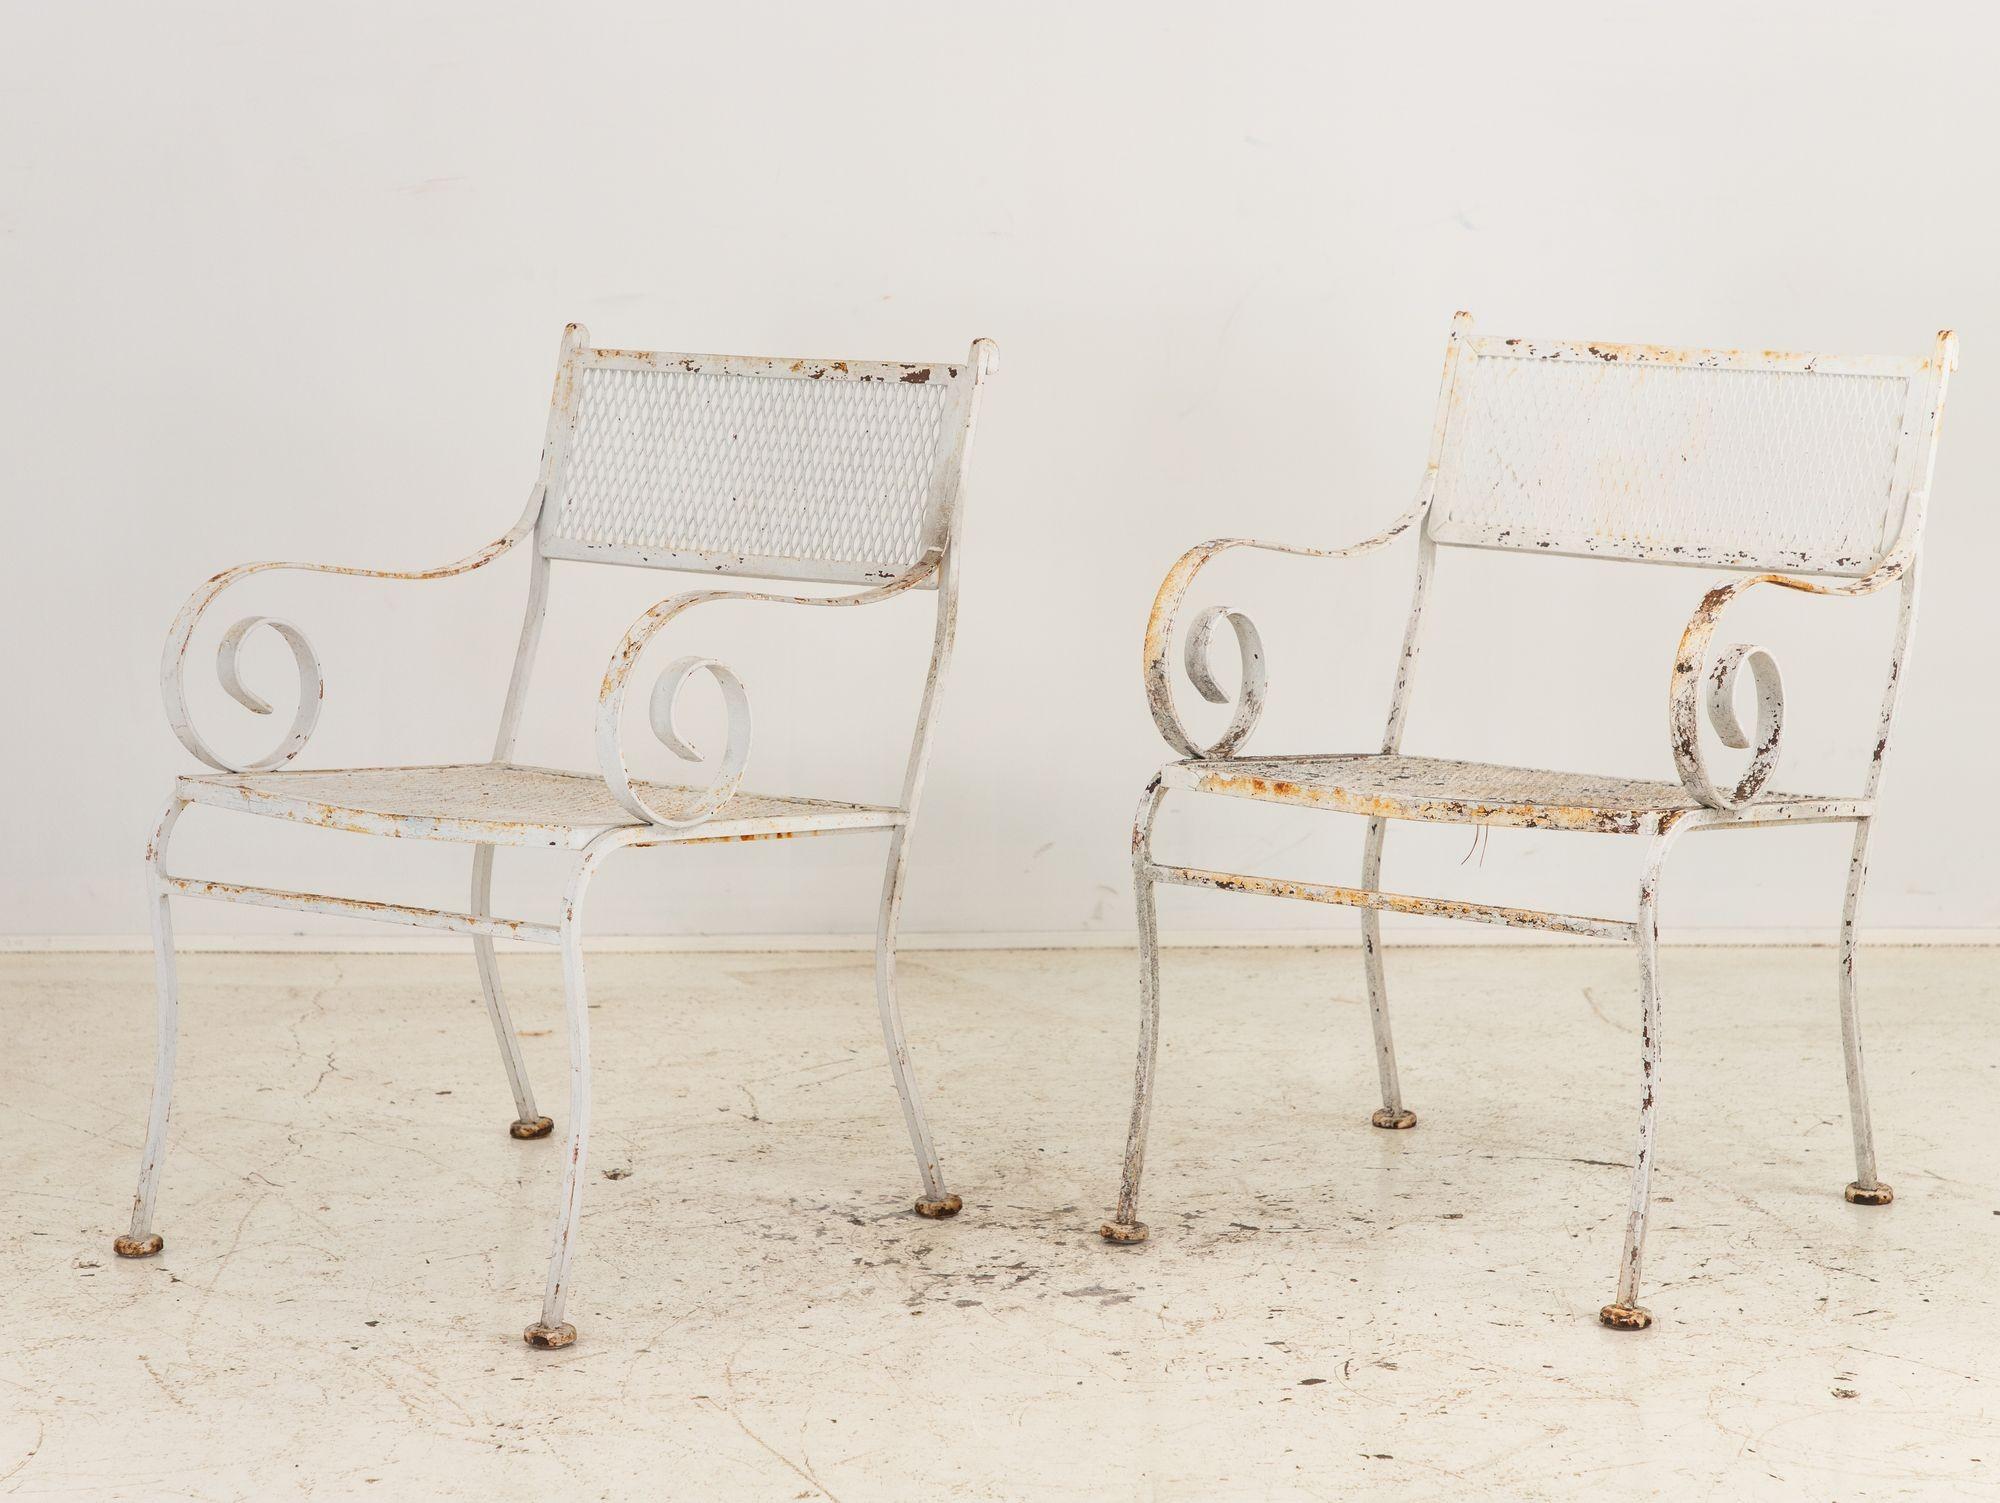 Iron Pair White Painted Metal Garden Chairs, American mid 20th Century For Sale